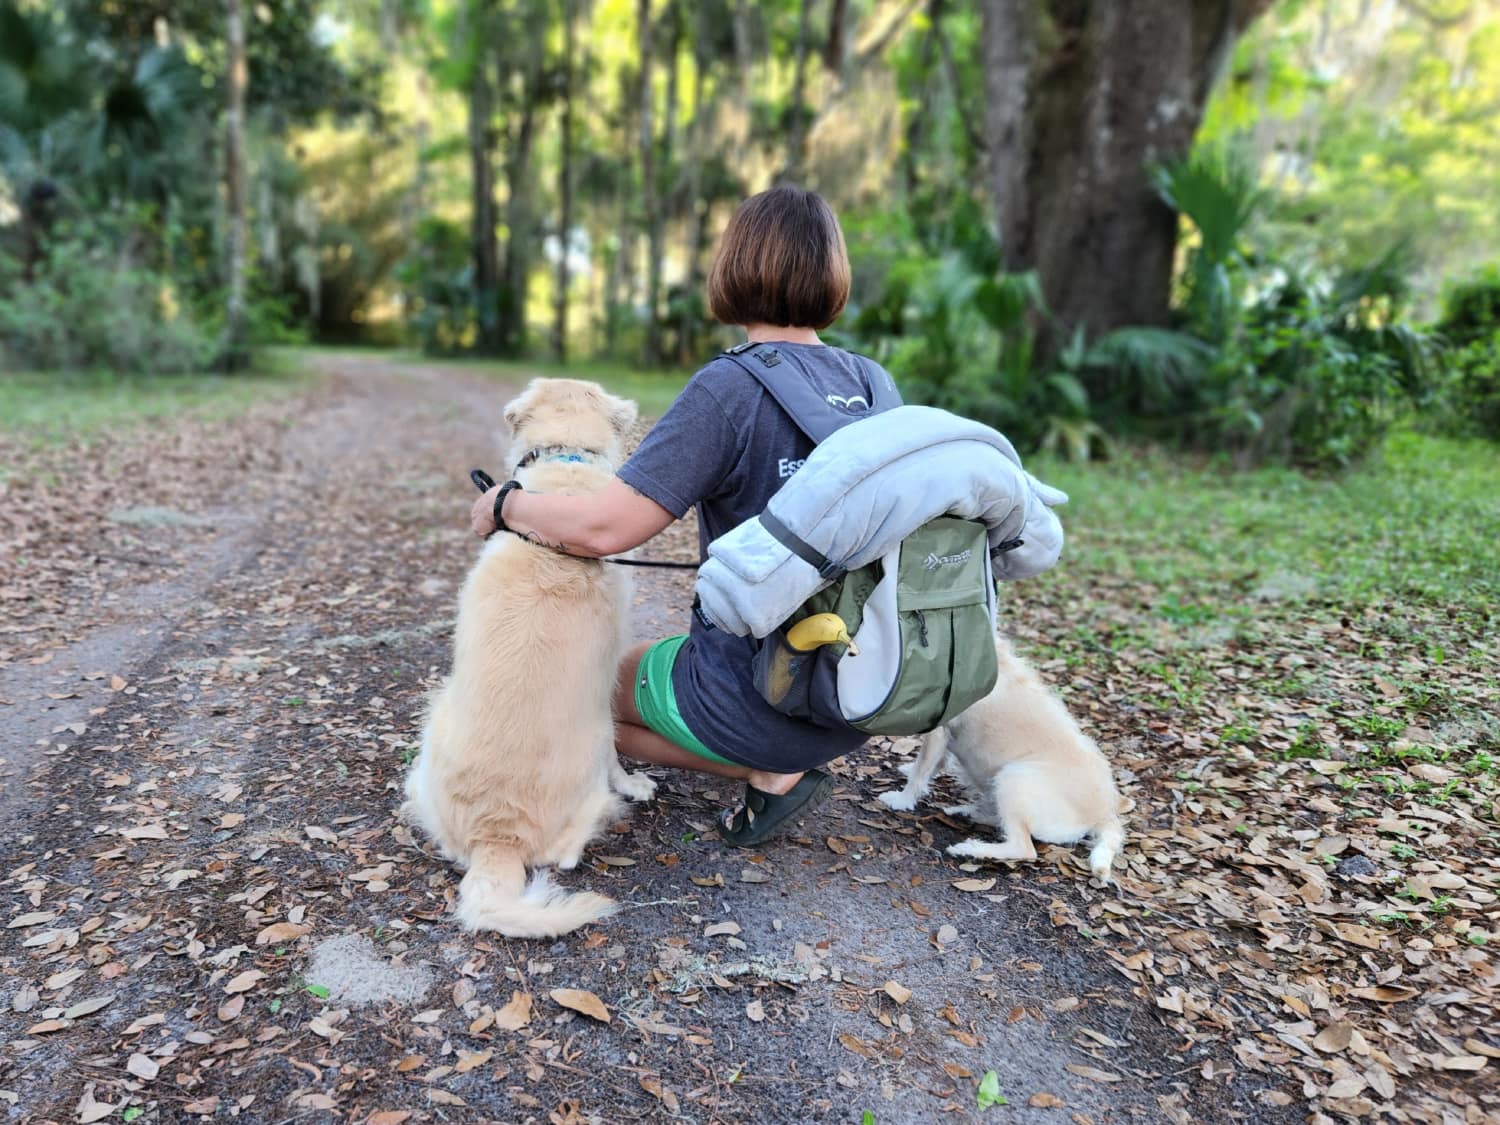 Zonli Pet Cooling Mat - product strapped to the backpack